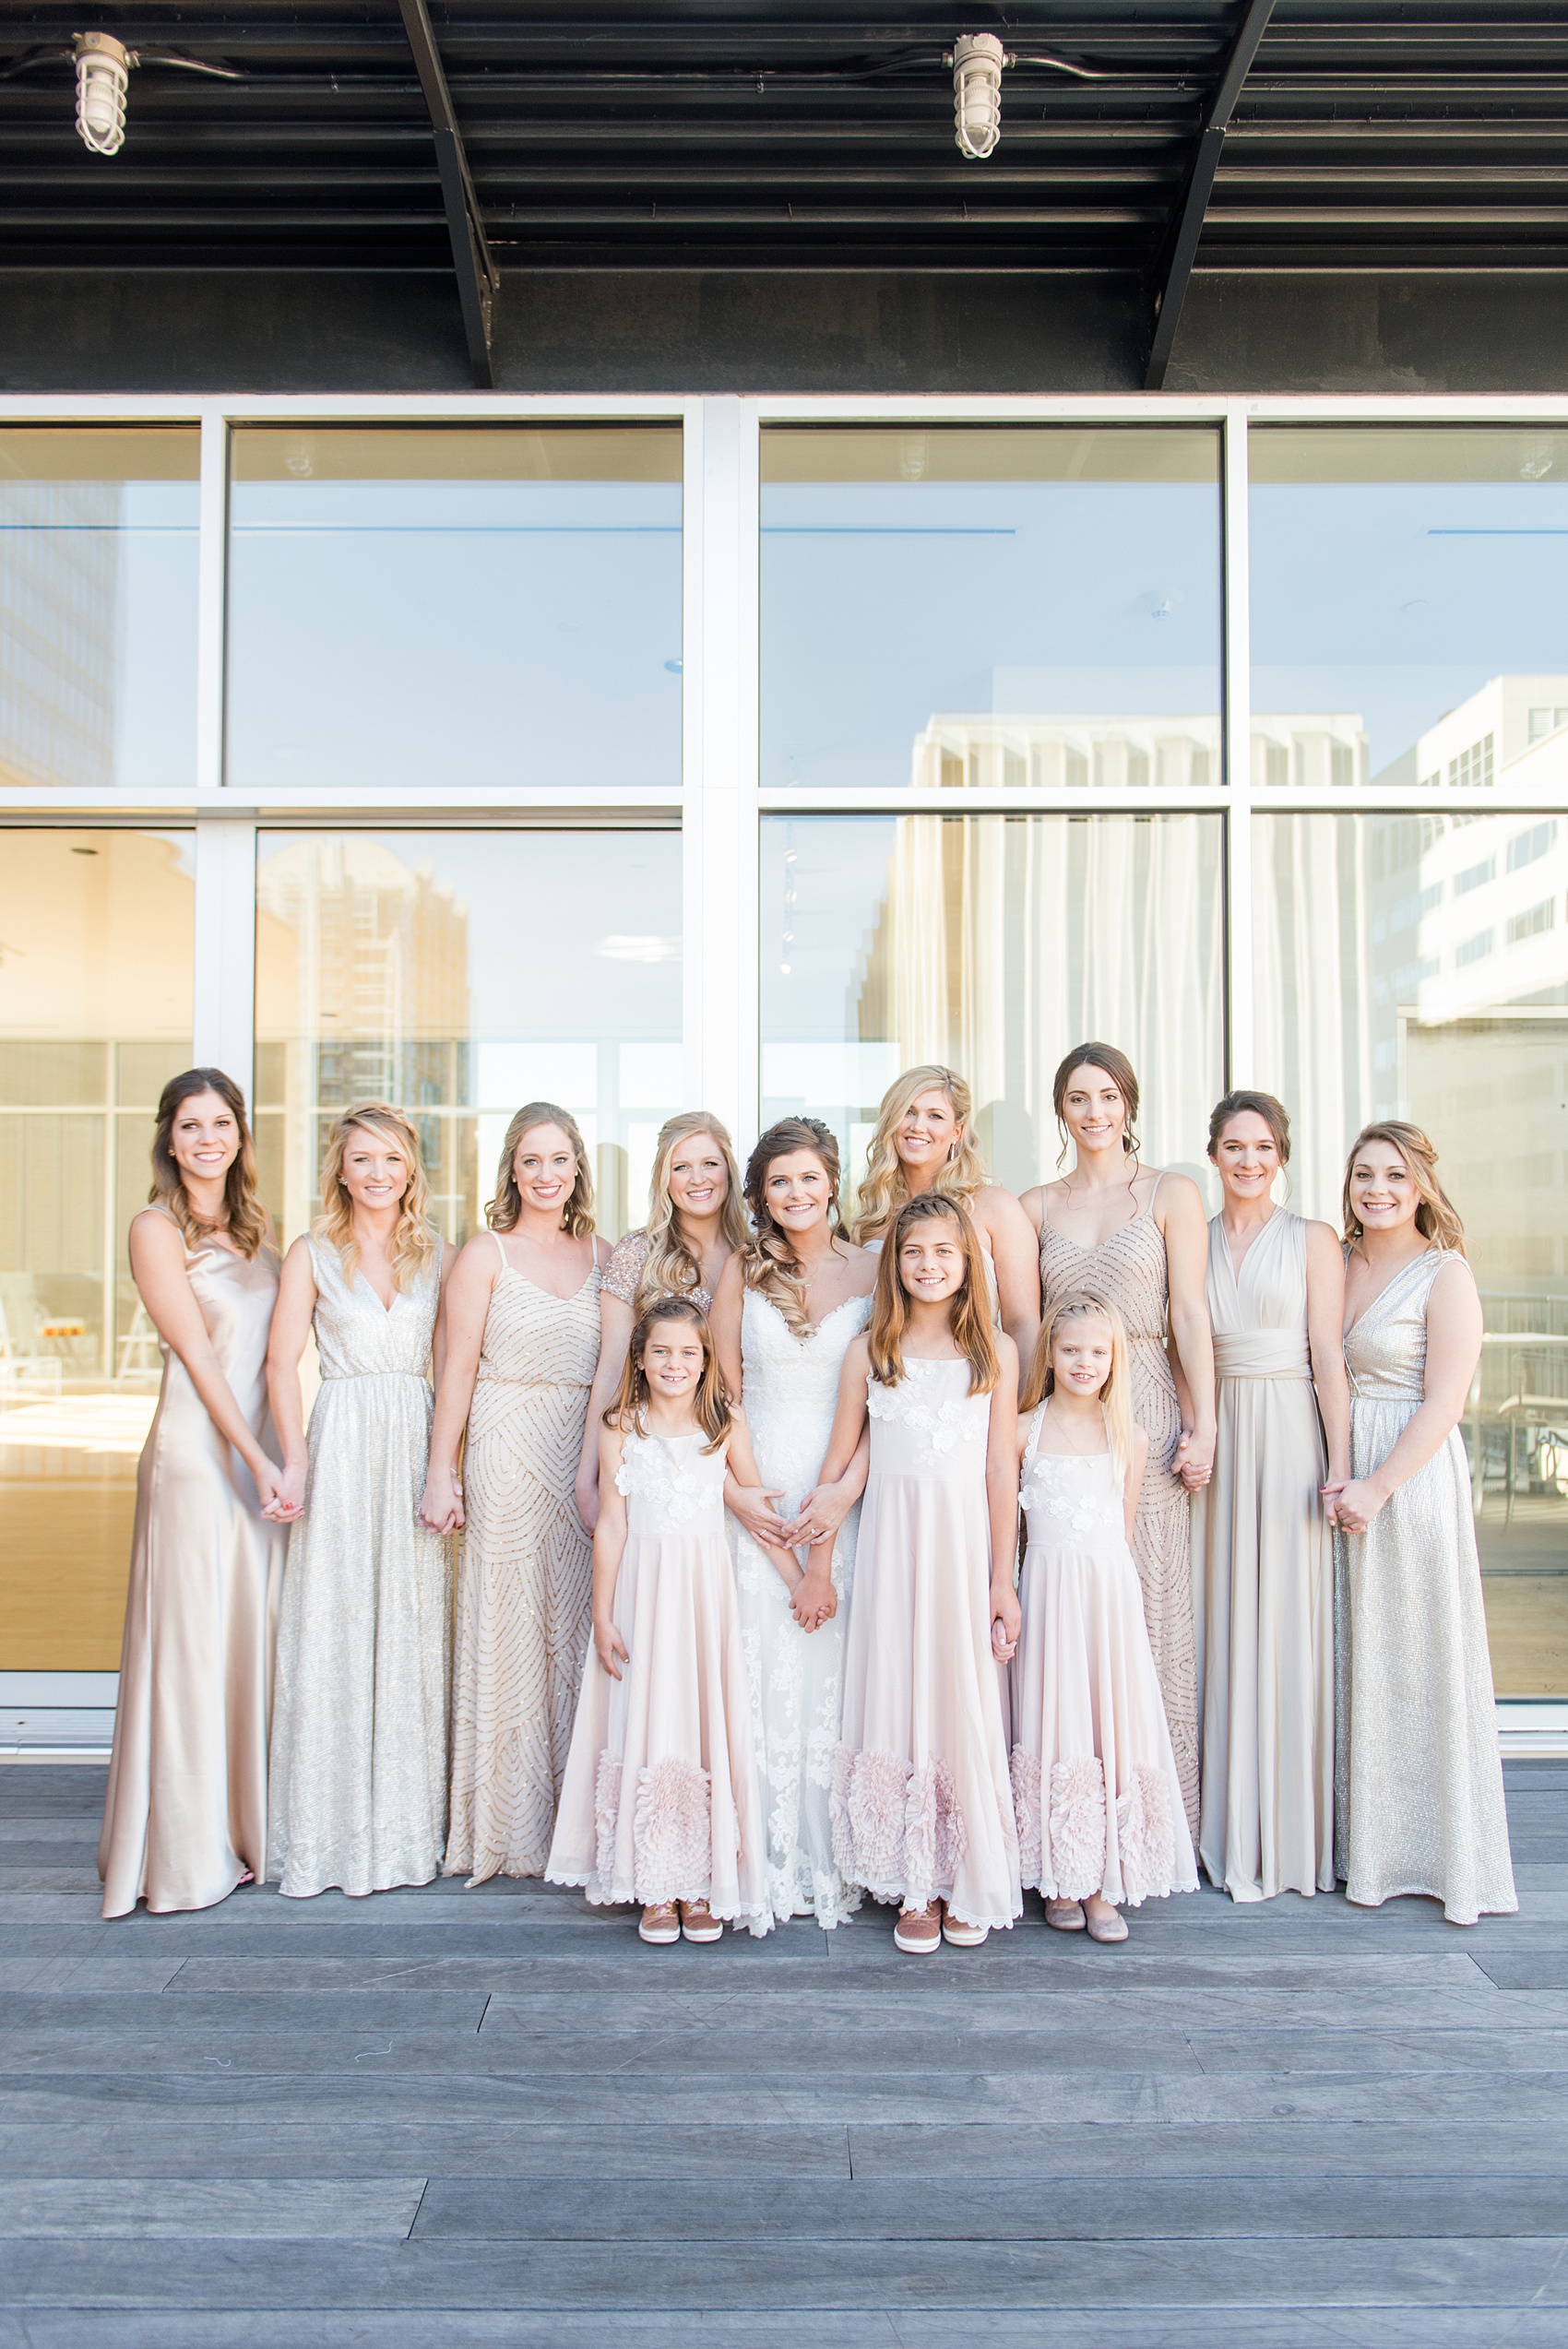 Pictures from a Christmas inspired wedding in downtown Raleigh, North Carolina by Mikkel Paige Photography. The bridesmaids got ready at The Glass Box and wore mismatched pink gowns. Click through for more ideas from a beautiful celebration, including decor photos in a green and gold decor palette for their reception at The Stockroom at 230. #mikkelpaige #raleighweddingphotographer #downtownRaleigh #weddingparty #bridalparty #pinkbridesmaids #sequingowns #winterwedding